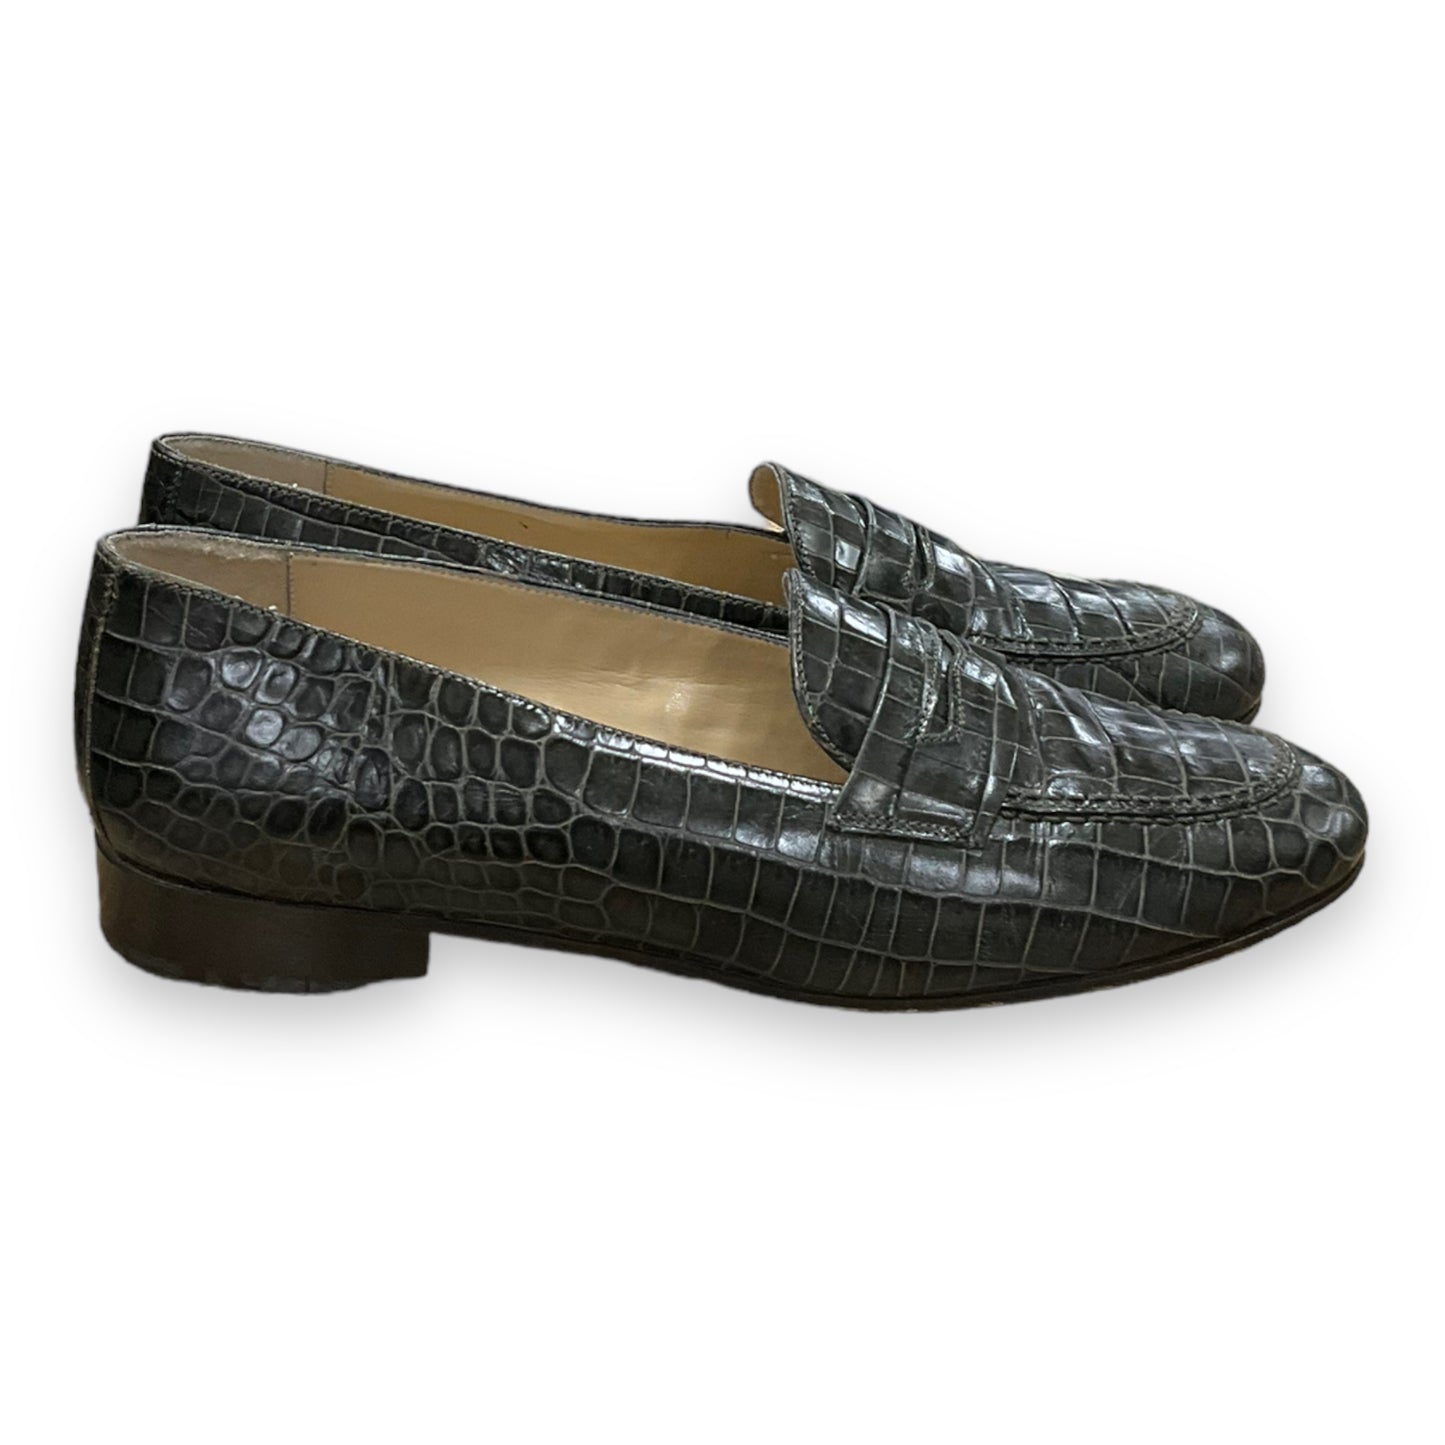 Shoes Flats Loafer Oxford By Talbots  Size: 7